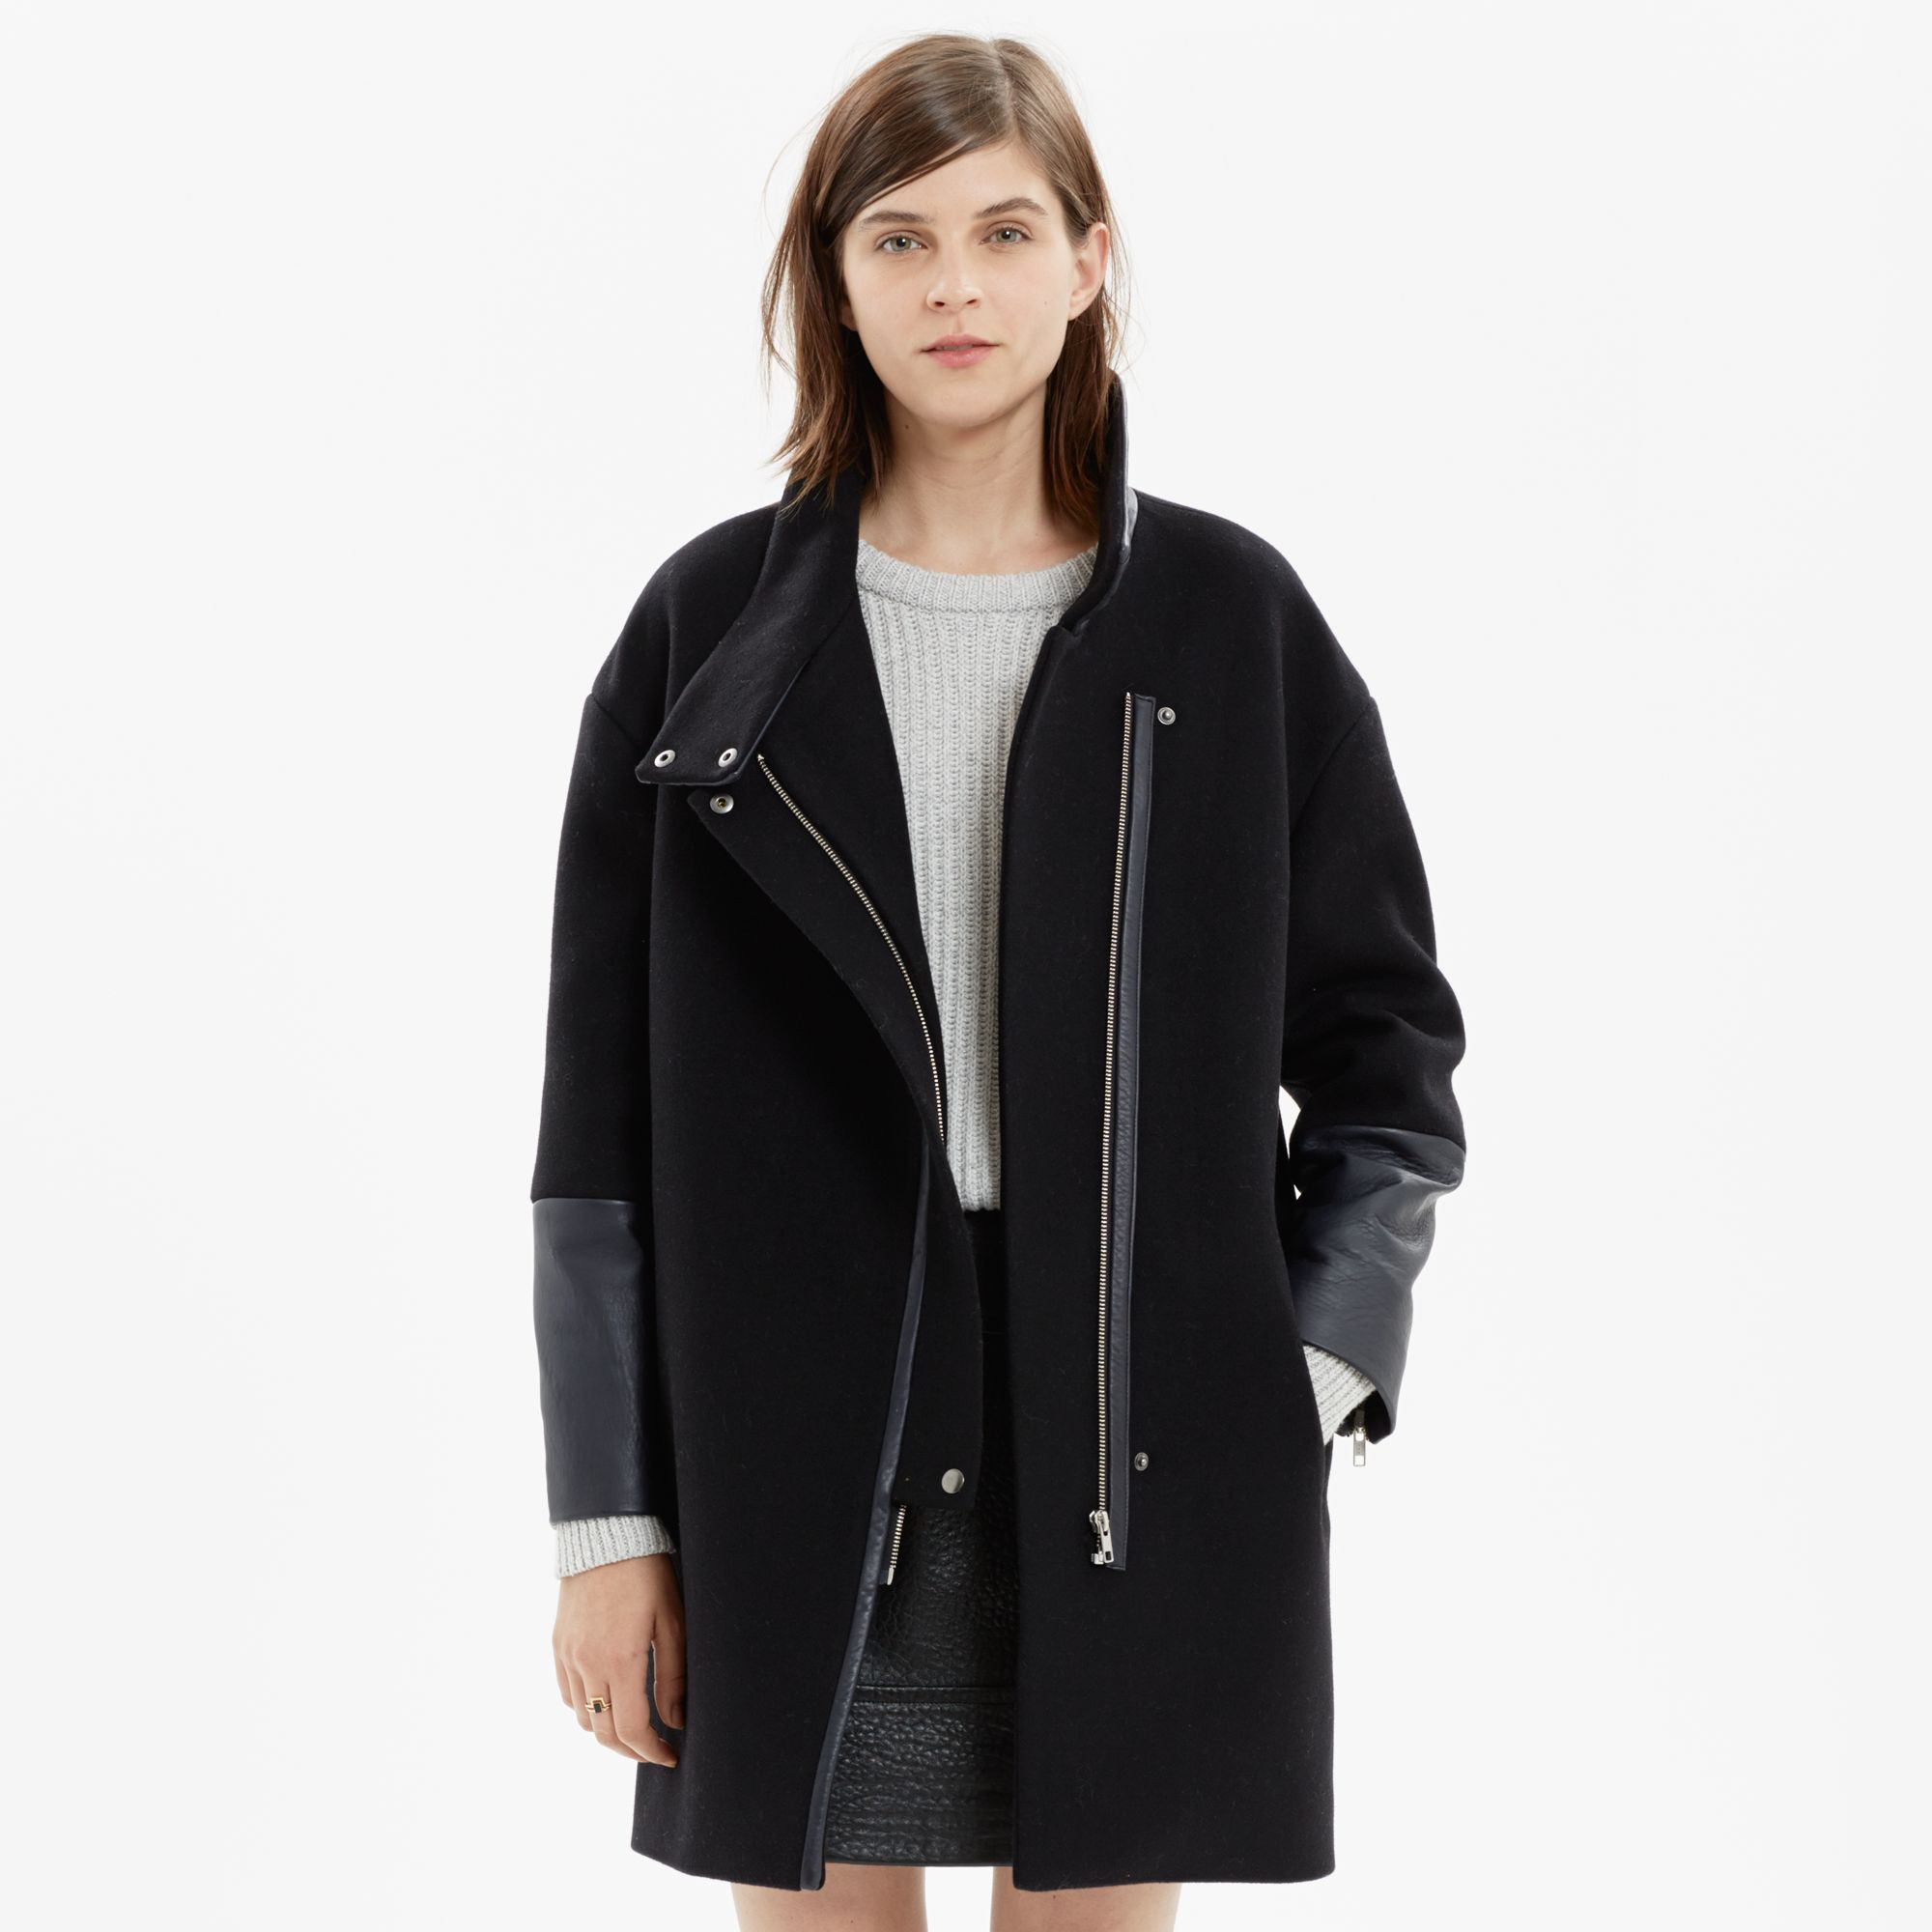 Lyst - Madewell Leather-edged City Grid Coat in Black